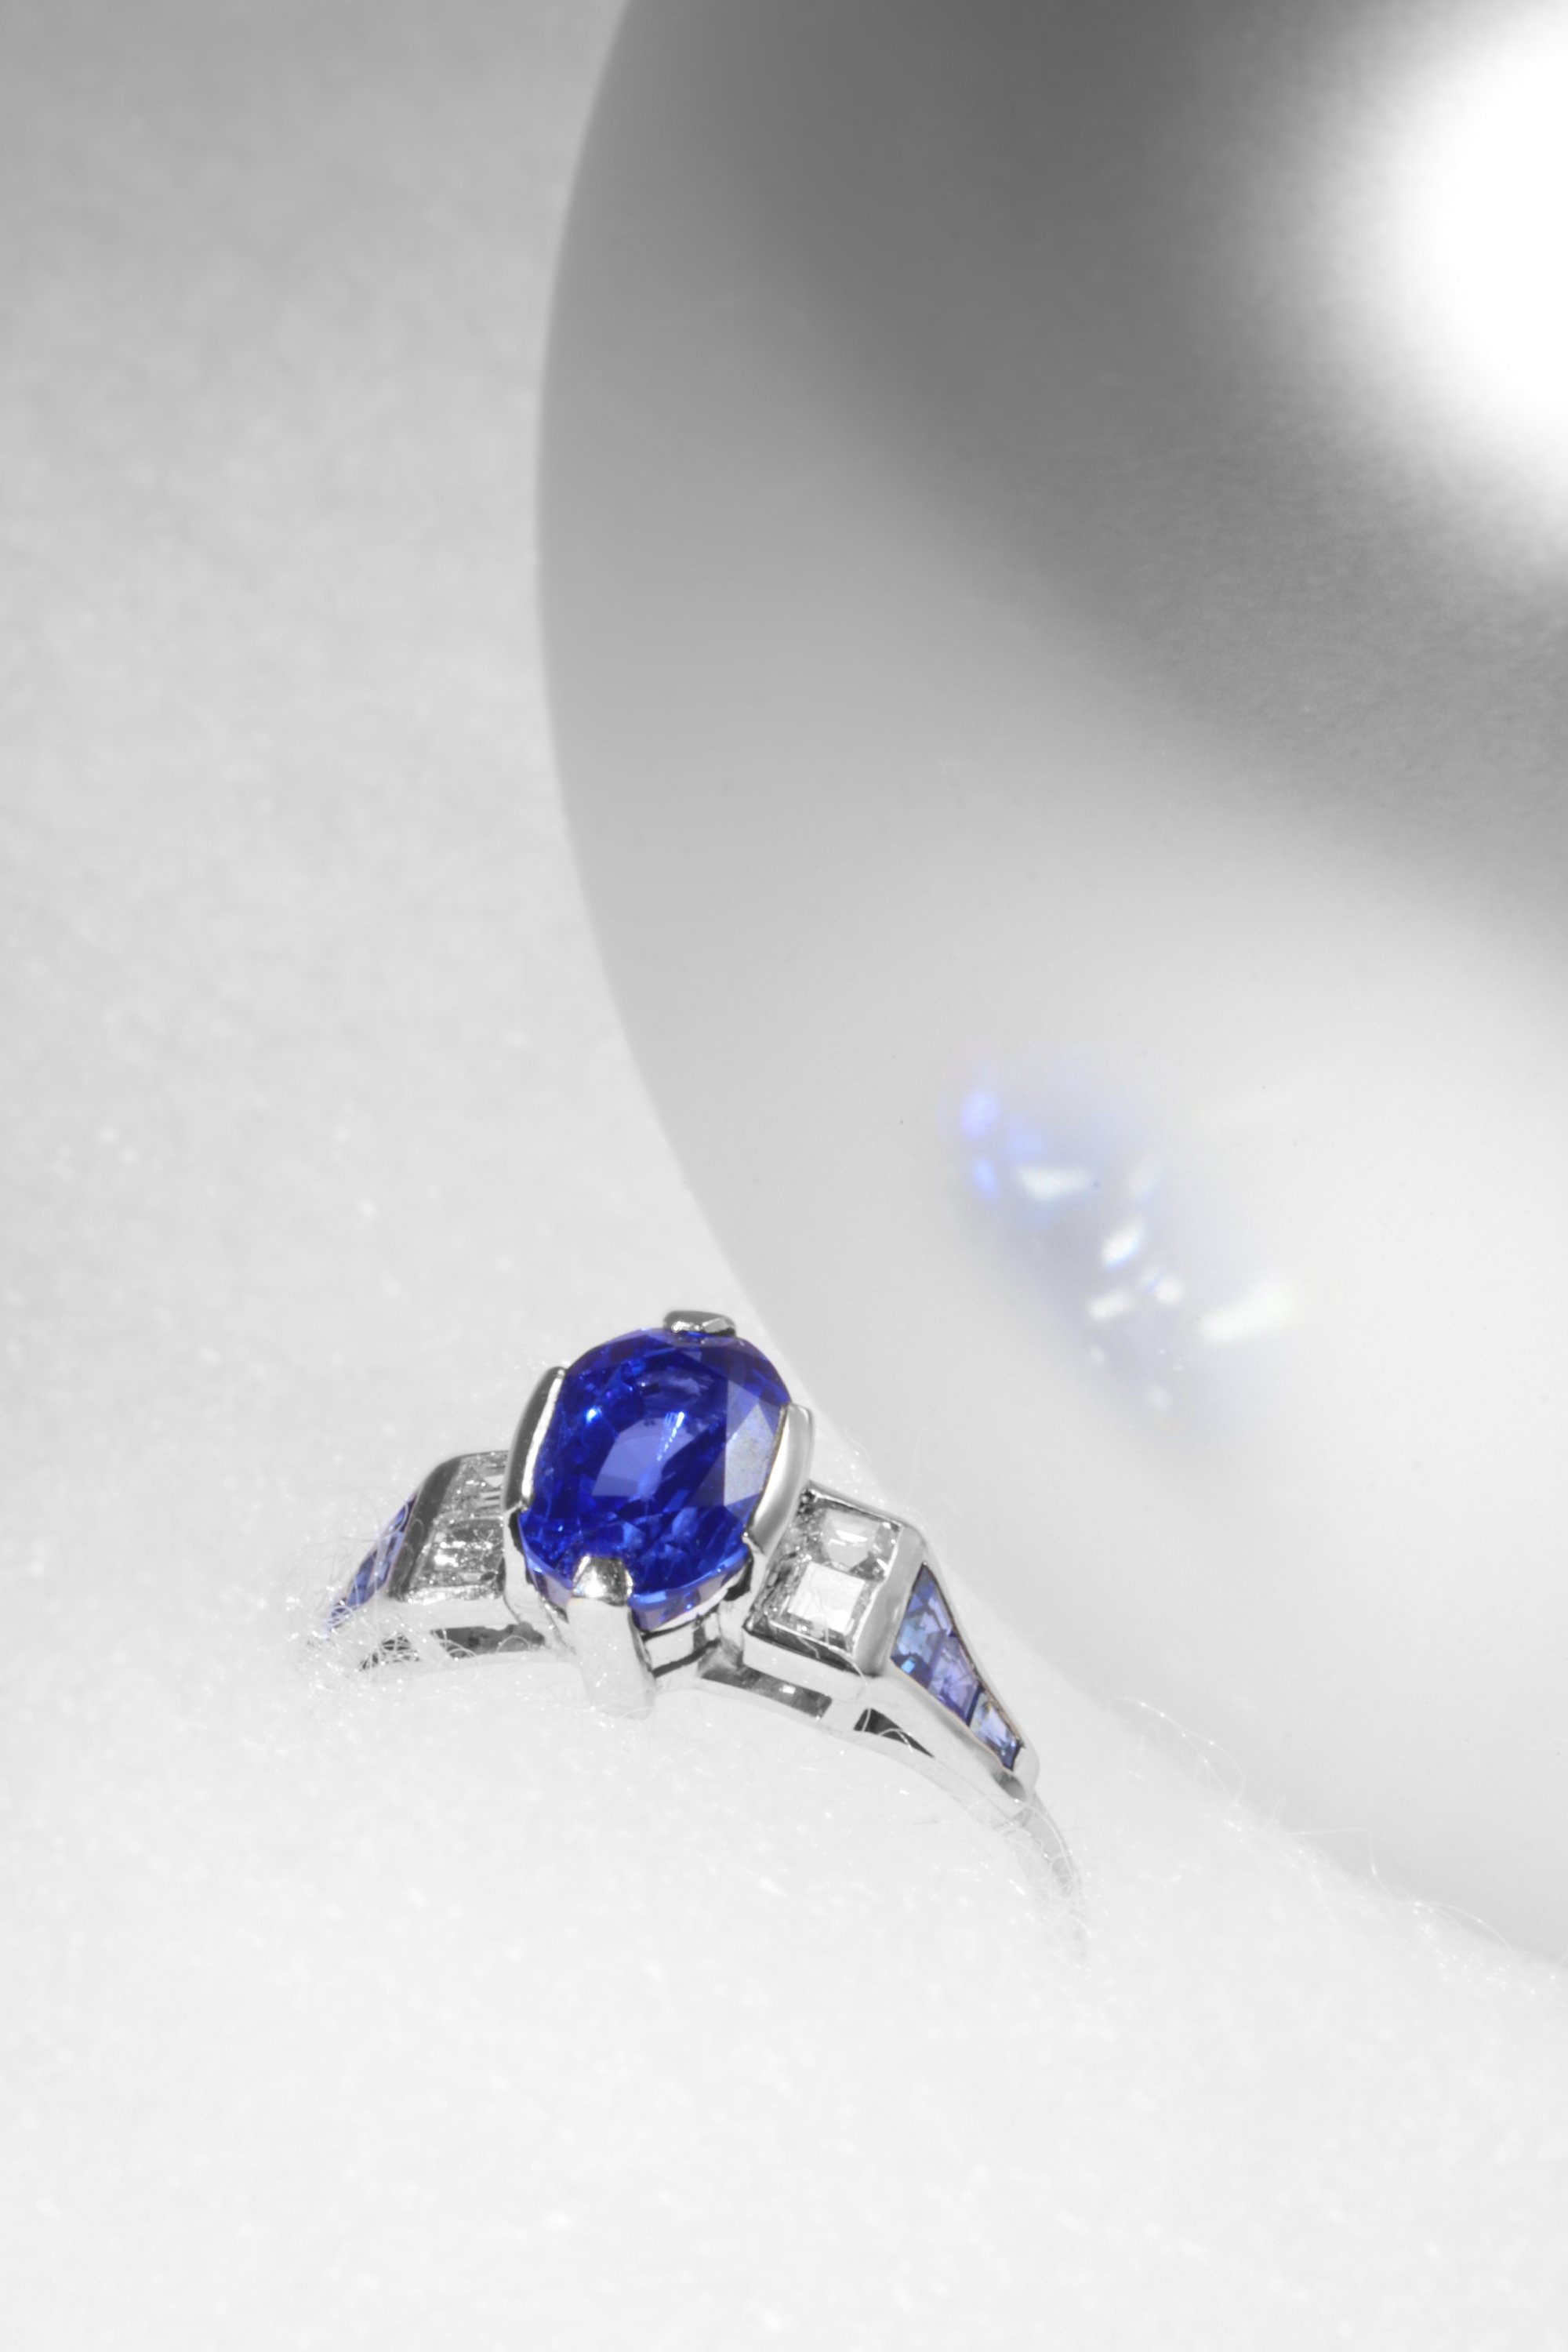 Click the picture to find out more about this timeless elegance: A Vintage Fifties Sapphire Ring